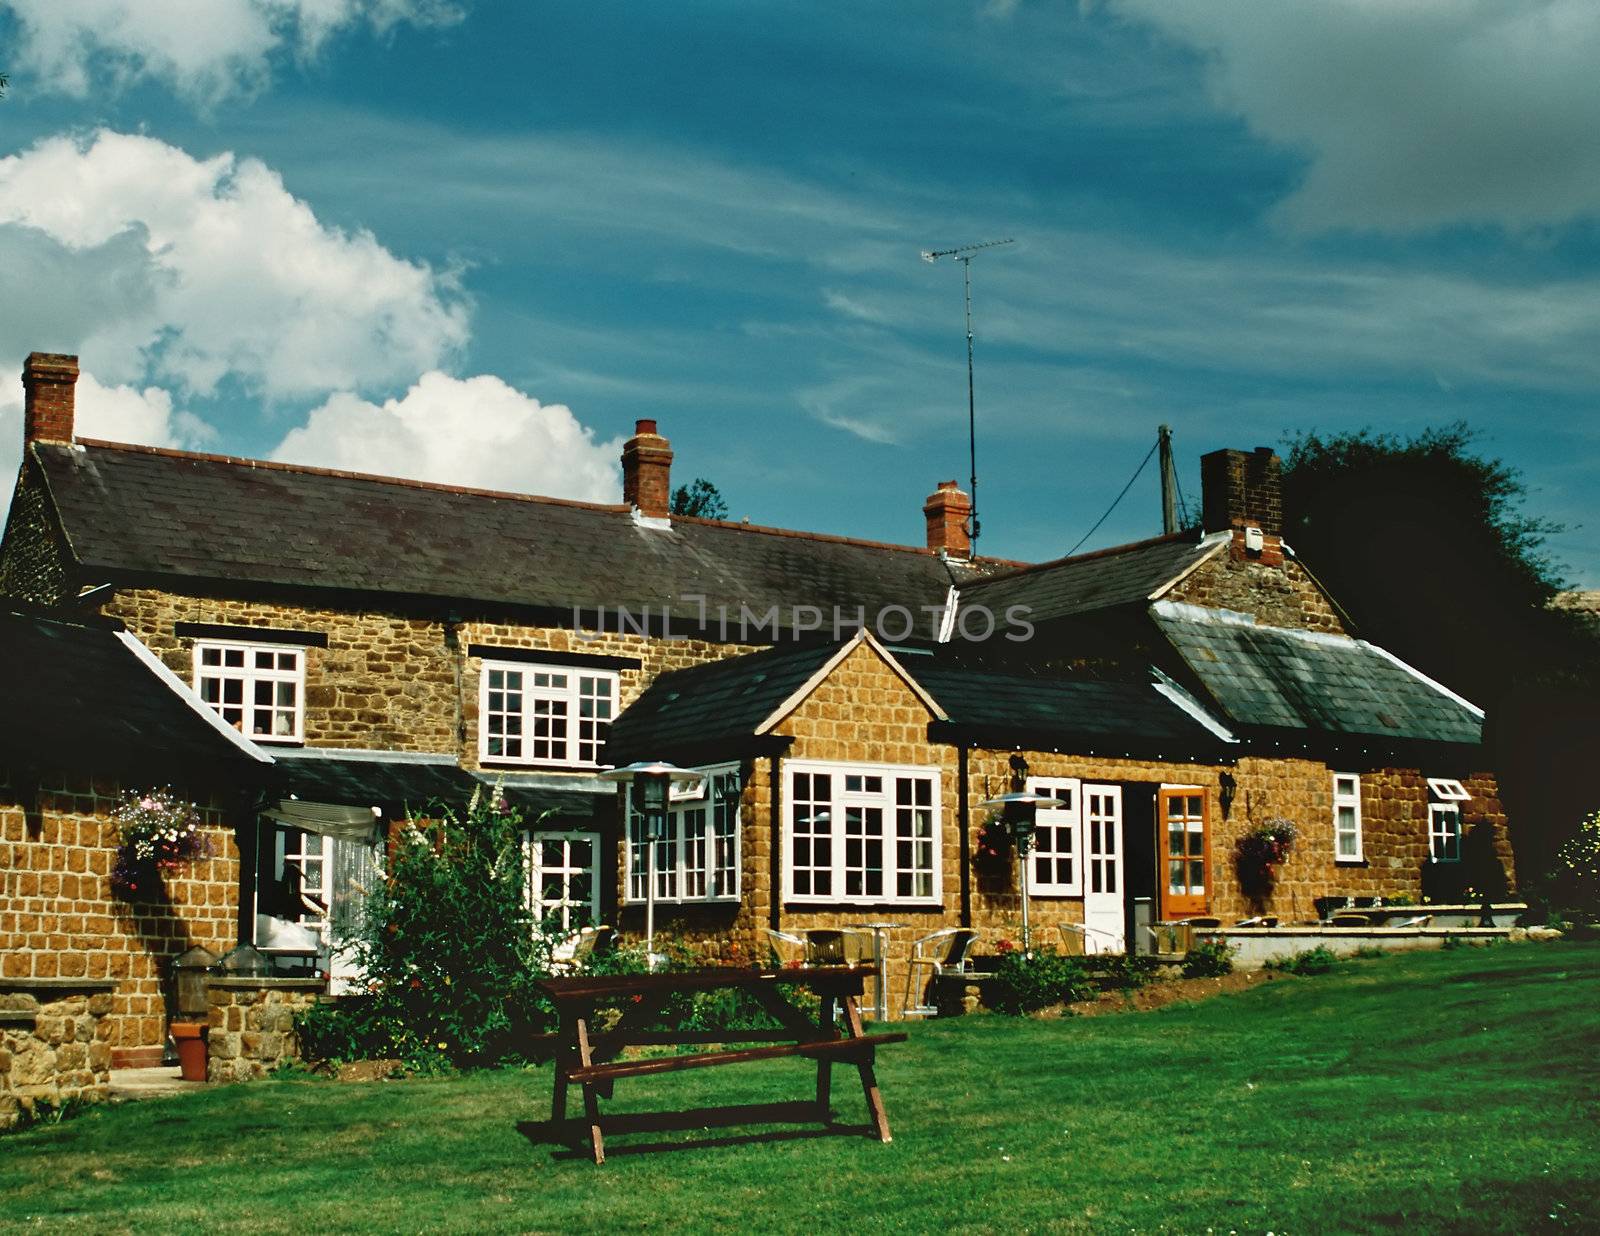 exterior of typical english country pub